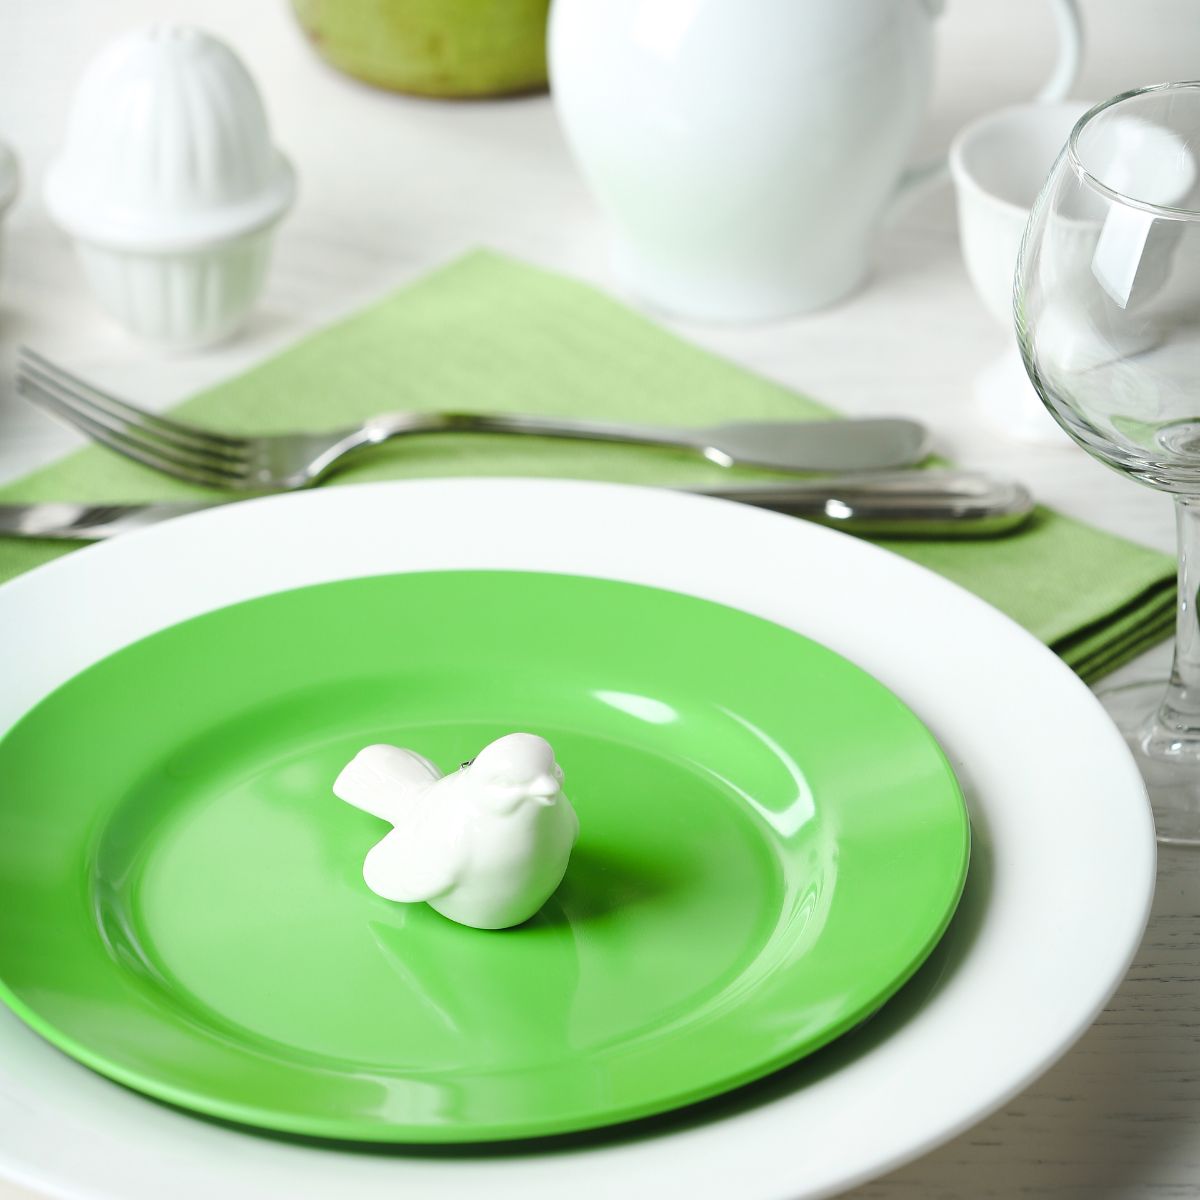 Dinner setting in white and green with a melamine plate.